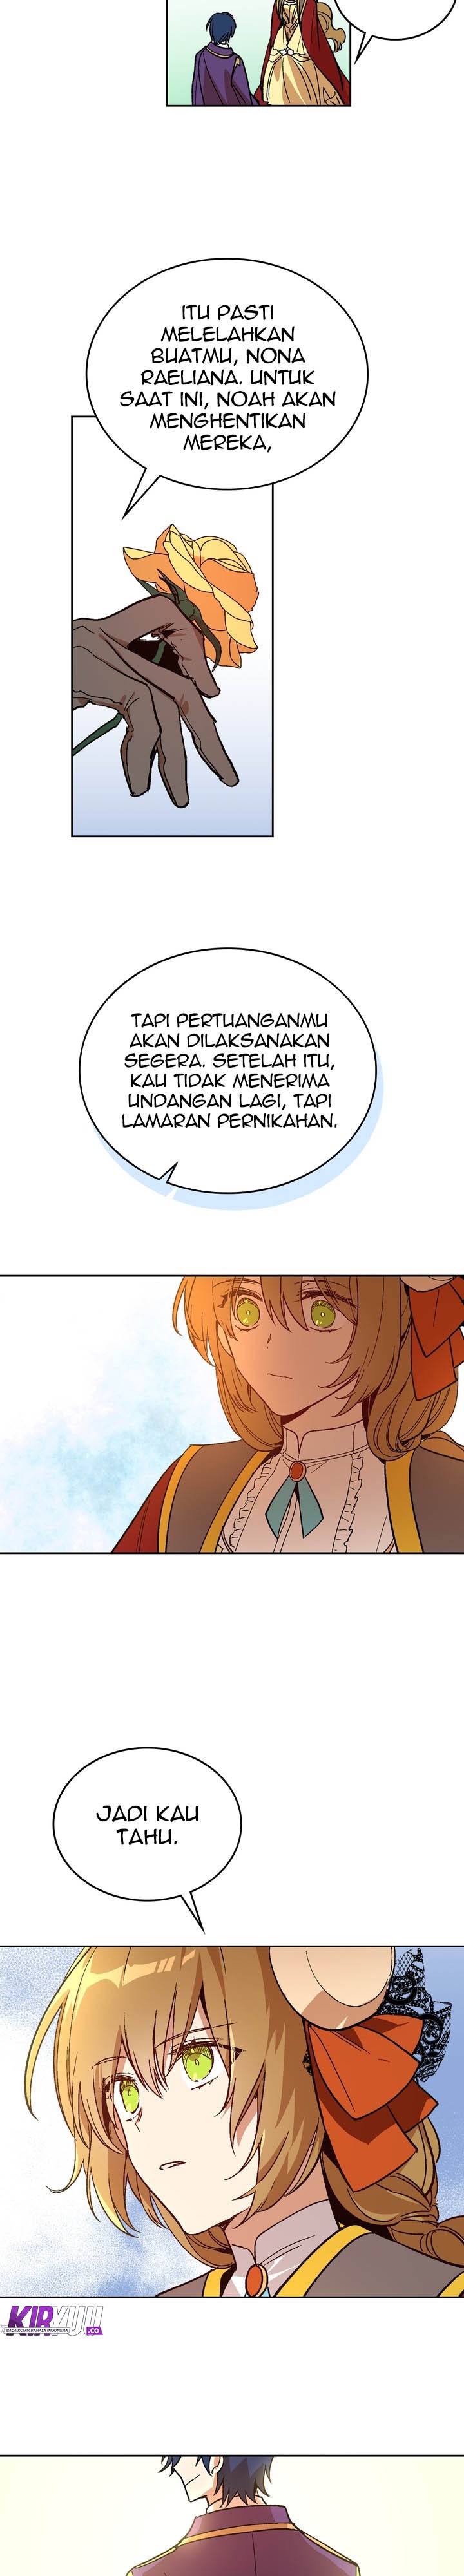 The Reason Why Raeliana Ended up at the Duke’s Mansion Chapter 55